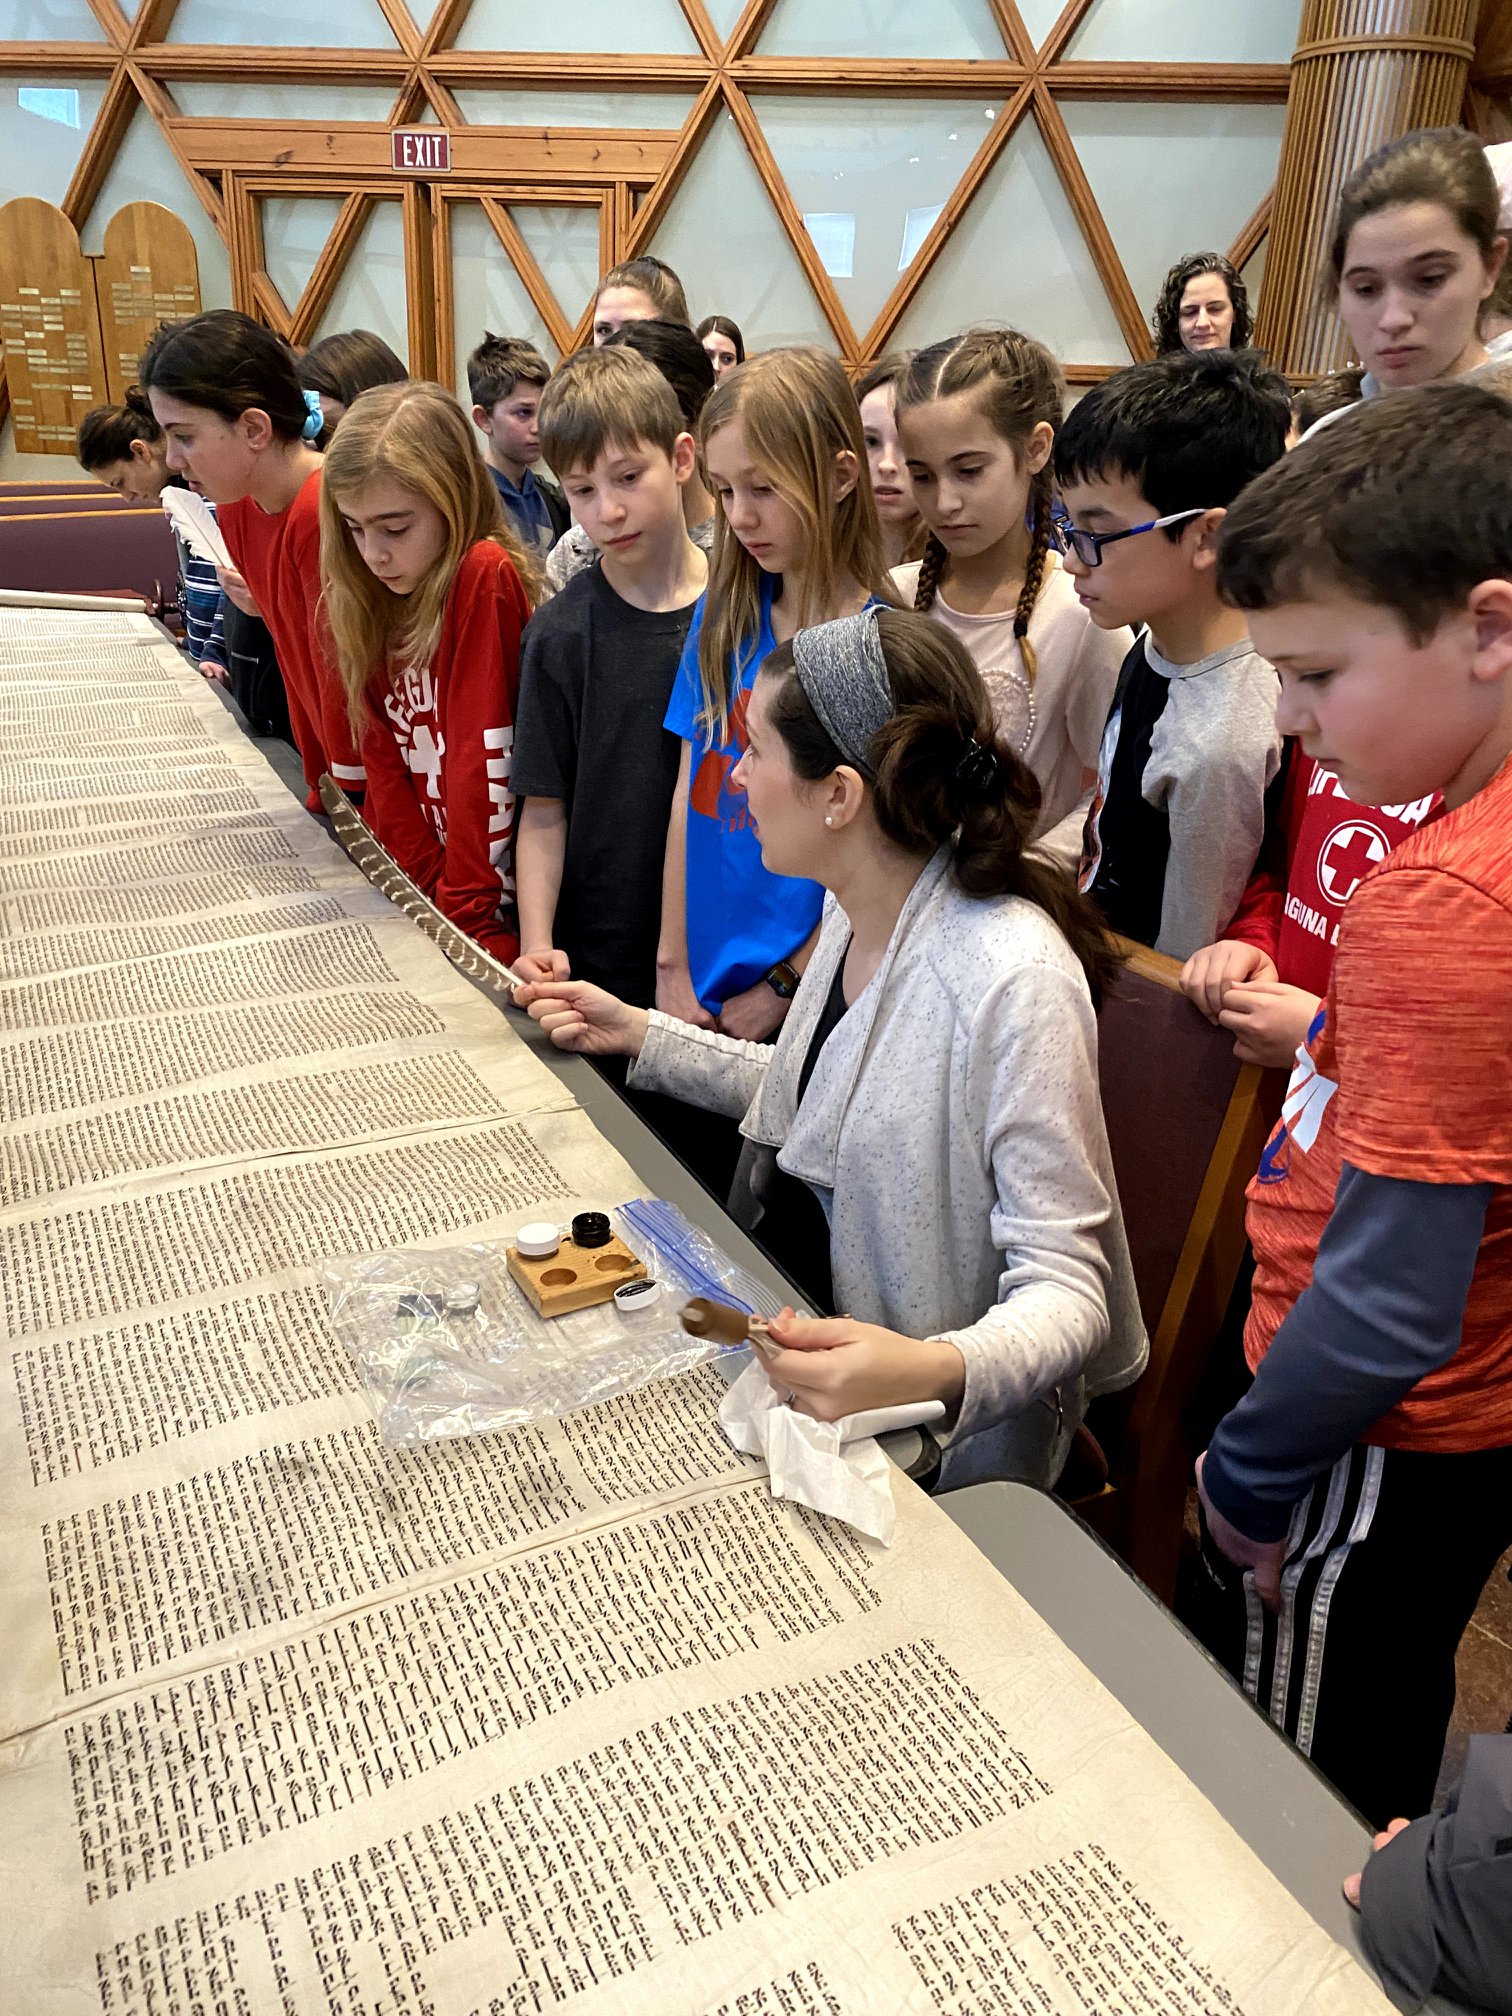 Alex teaches religious school students about caring for torah scrolls in Minnetonka, MN